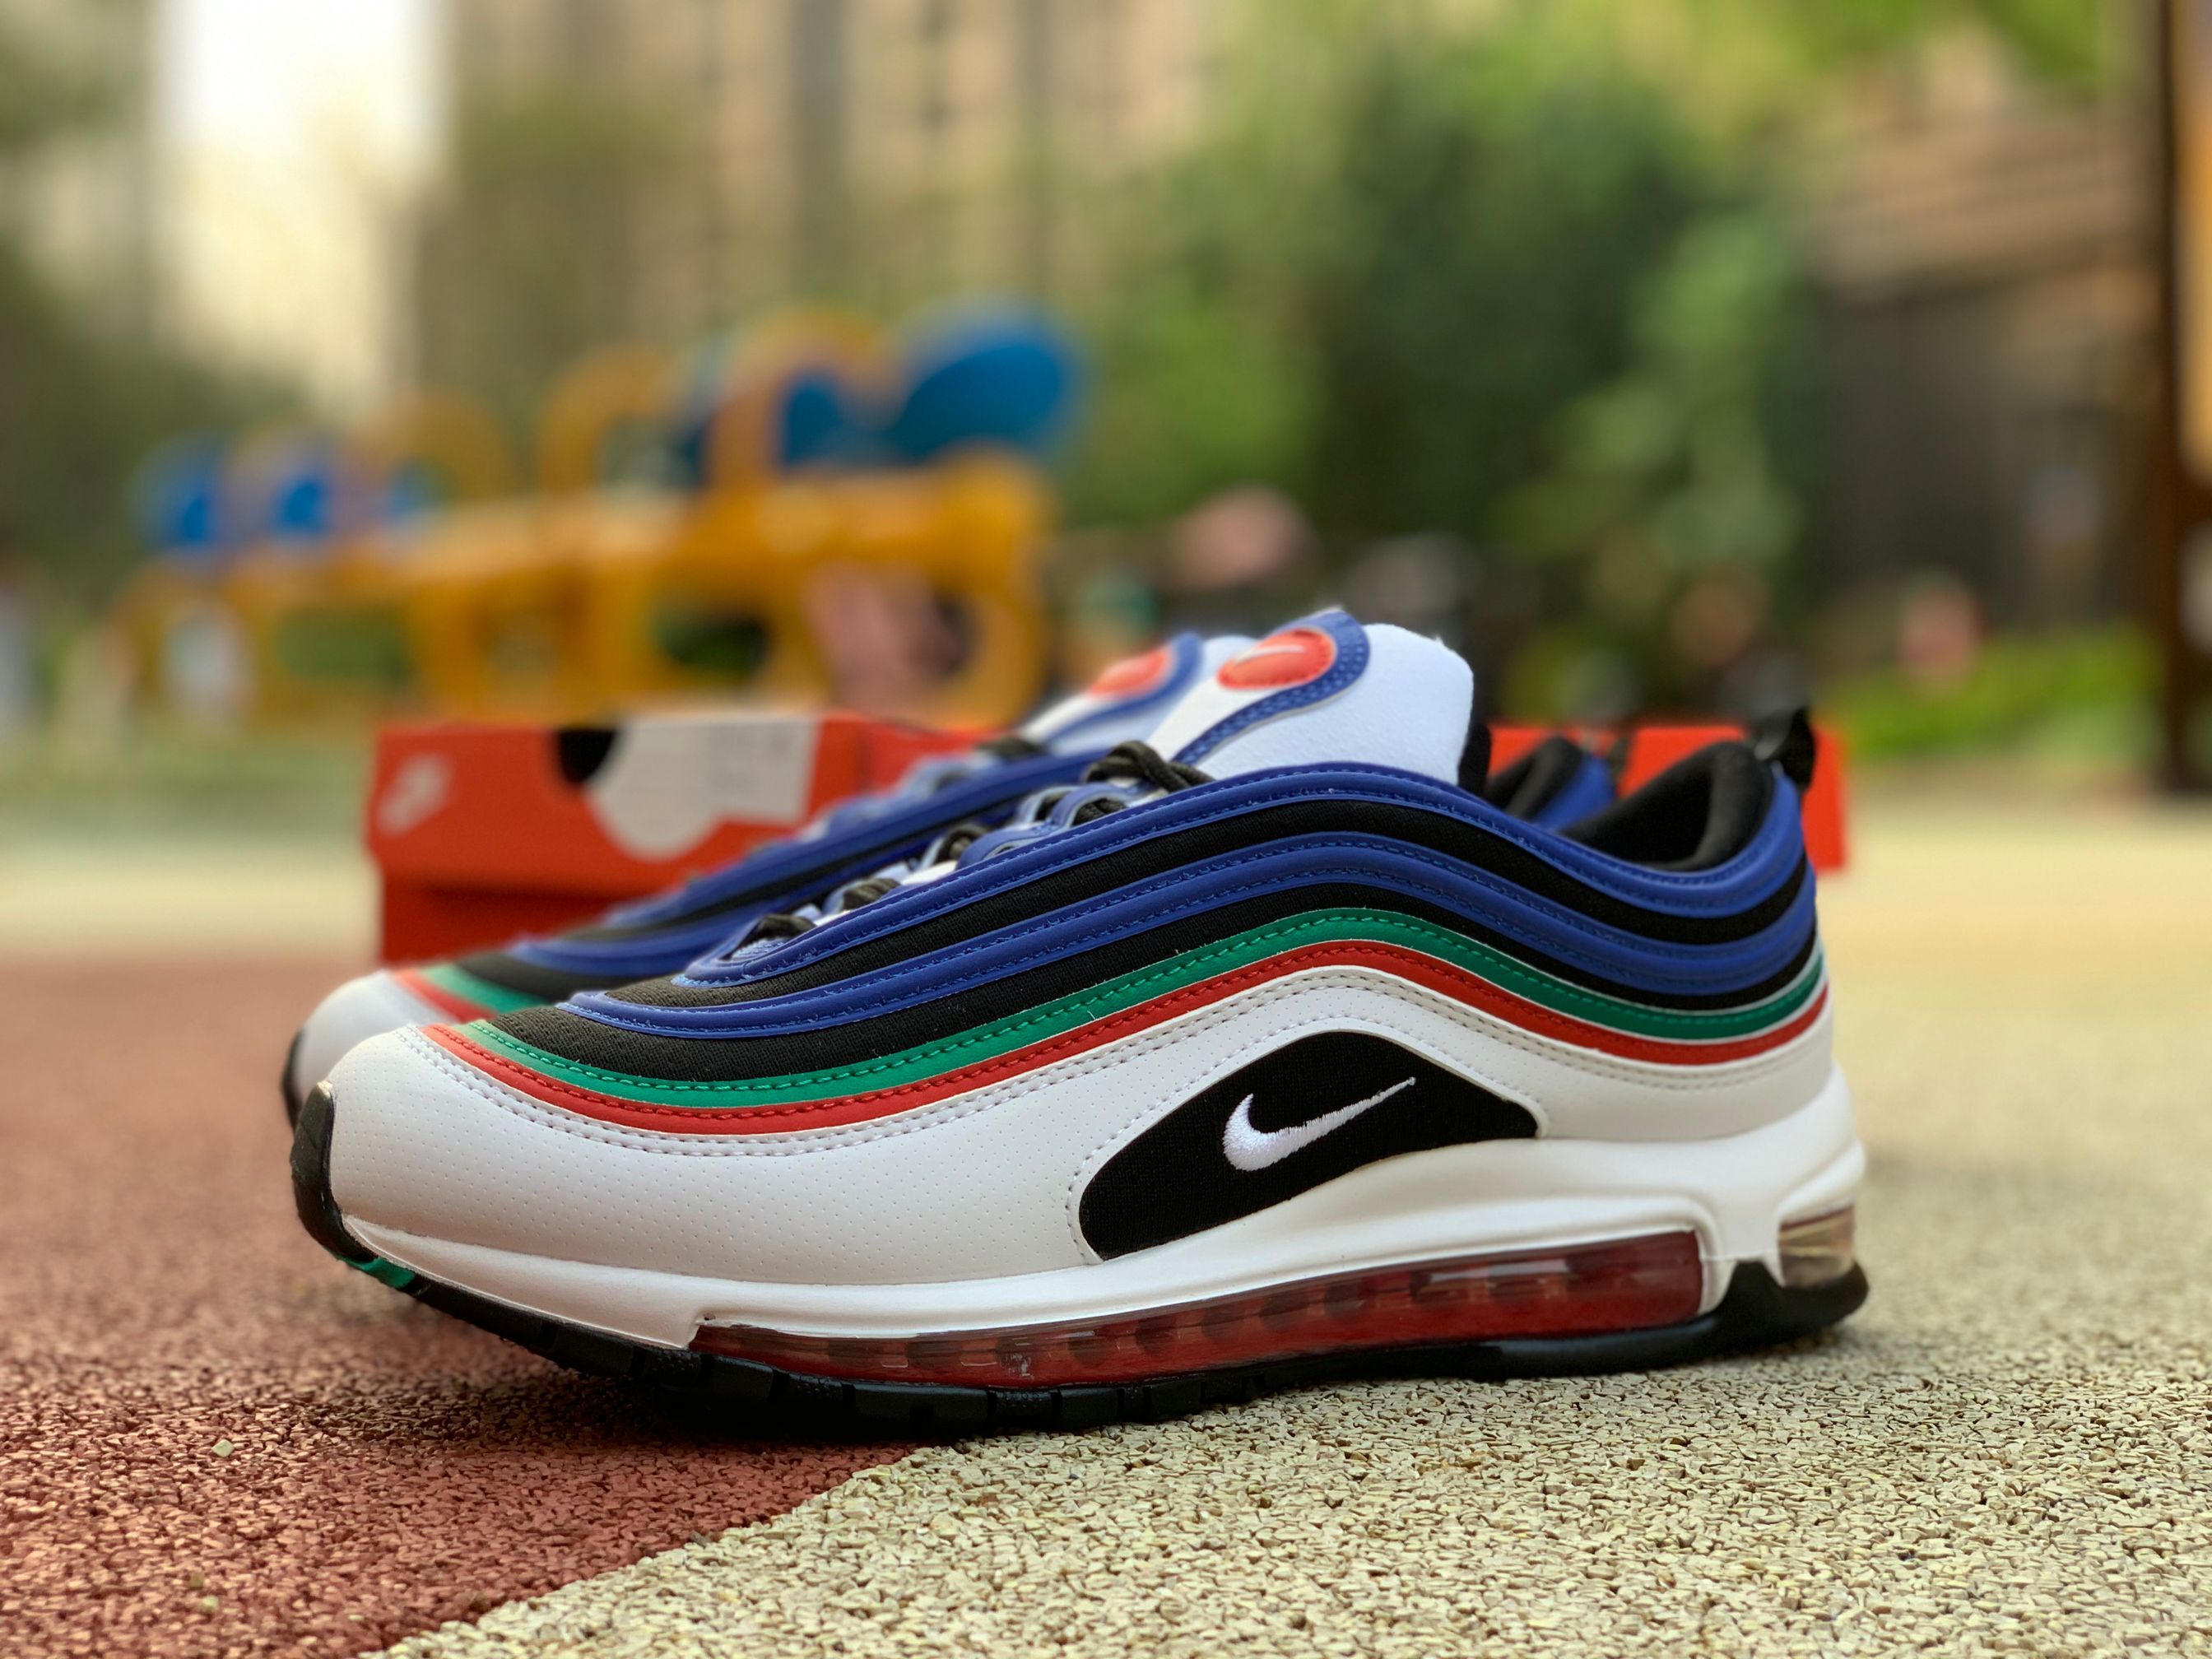 Latest Release Nike Air Max 97 Running Shoes White/Multi-Color/Hyper